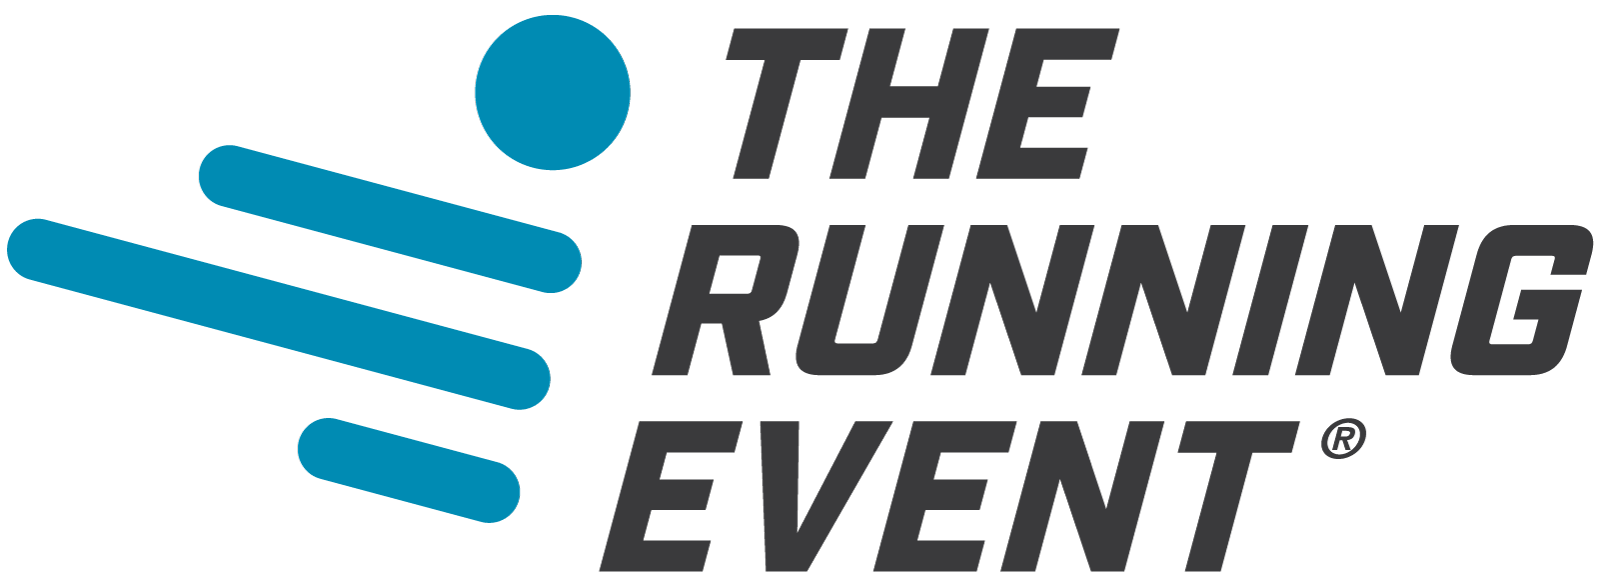 The Running Event